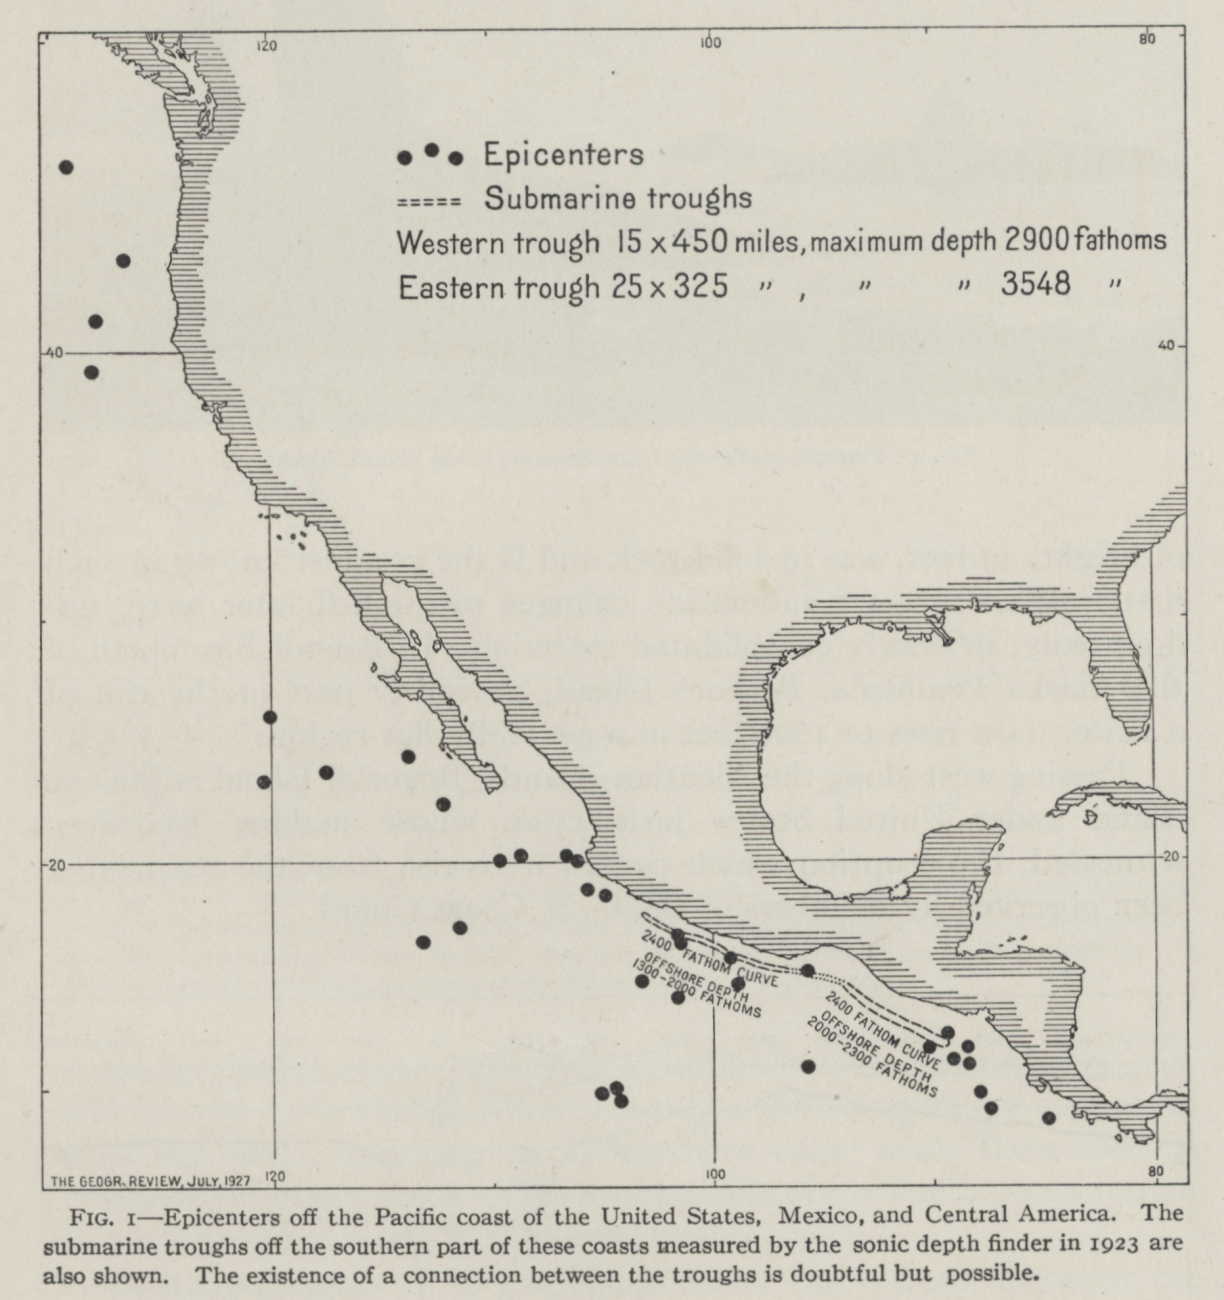 Crudely located epicenters of earthquakes published by Nicholas Heck of theCoast and Geodetic Survey in 1927